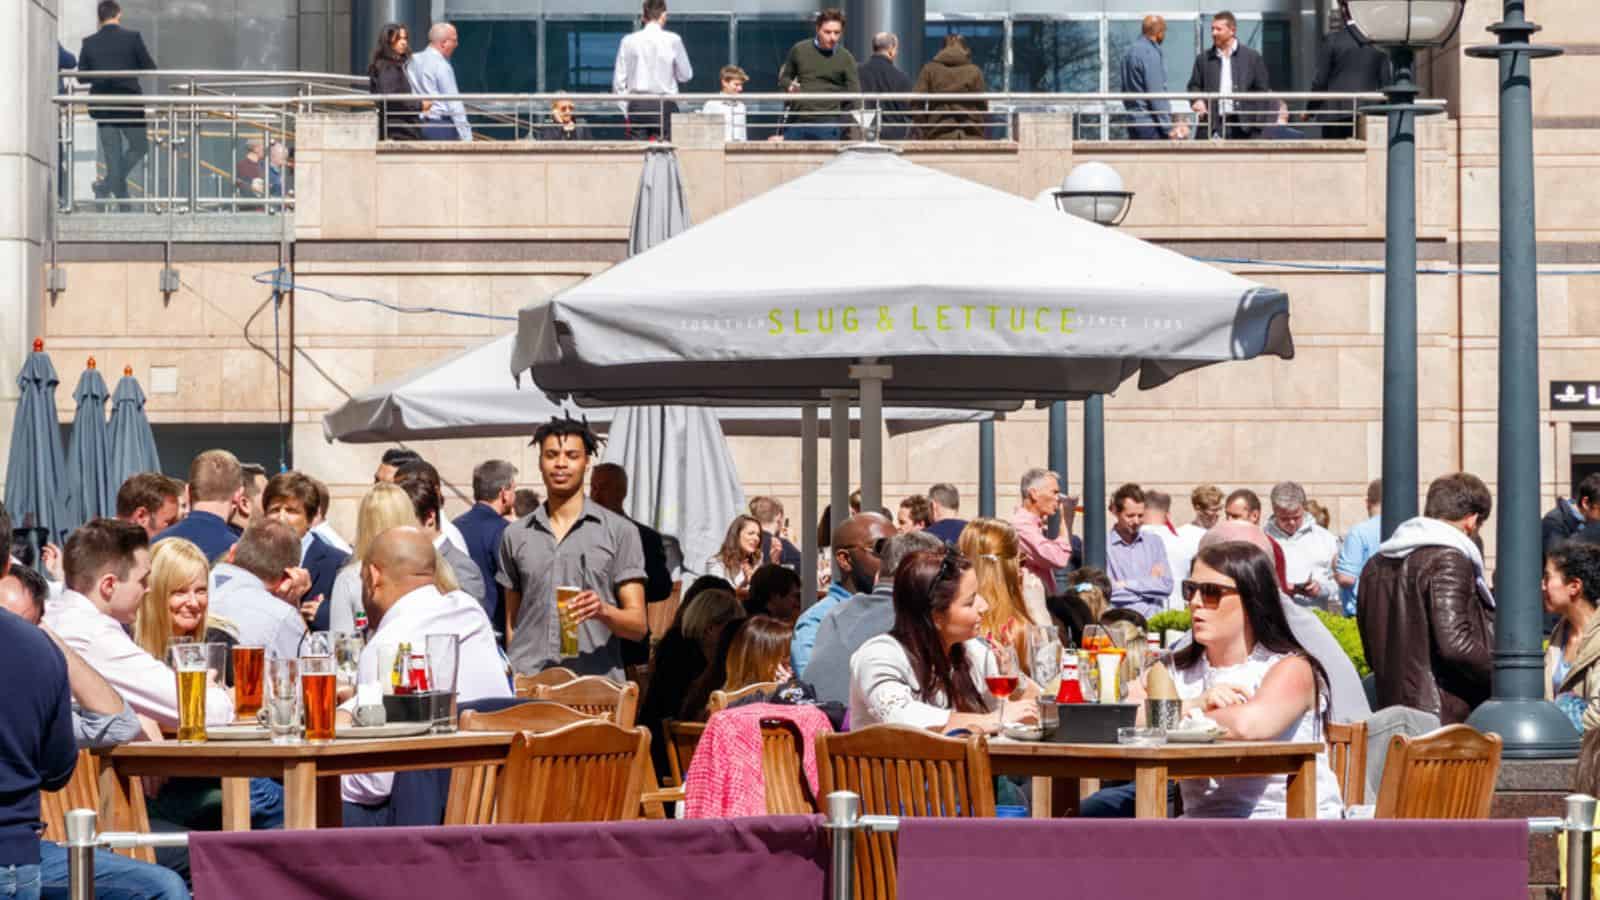 An outdoor bar in Canary Wharf packed with people